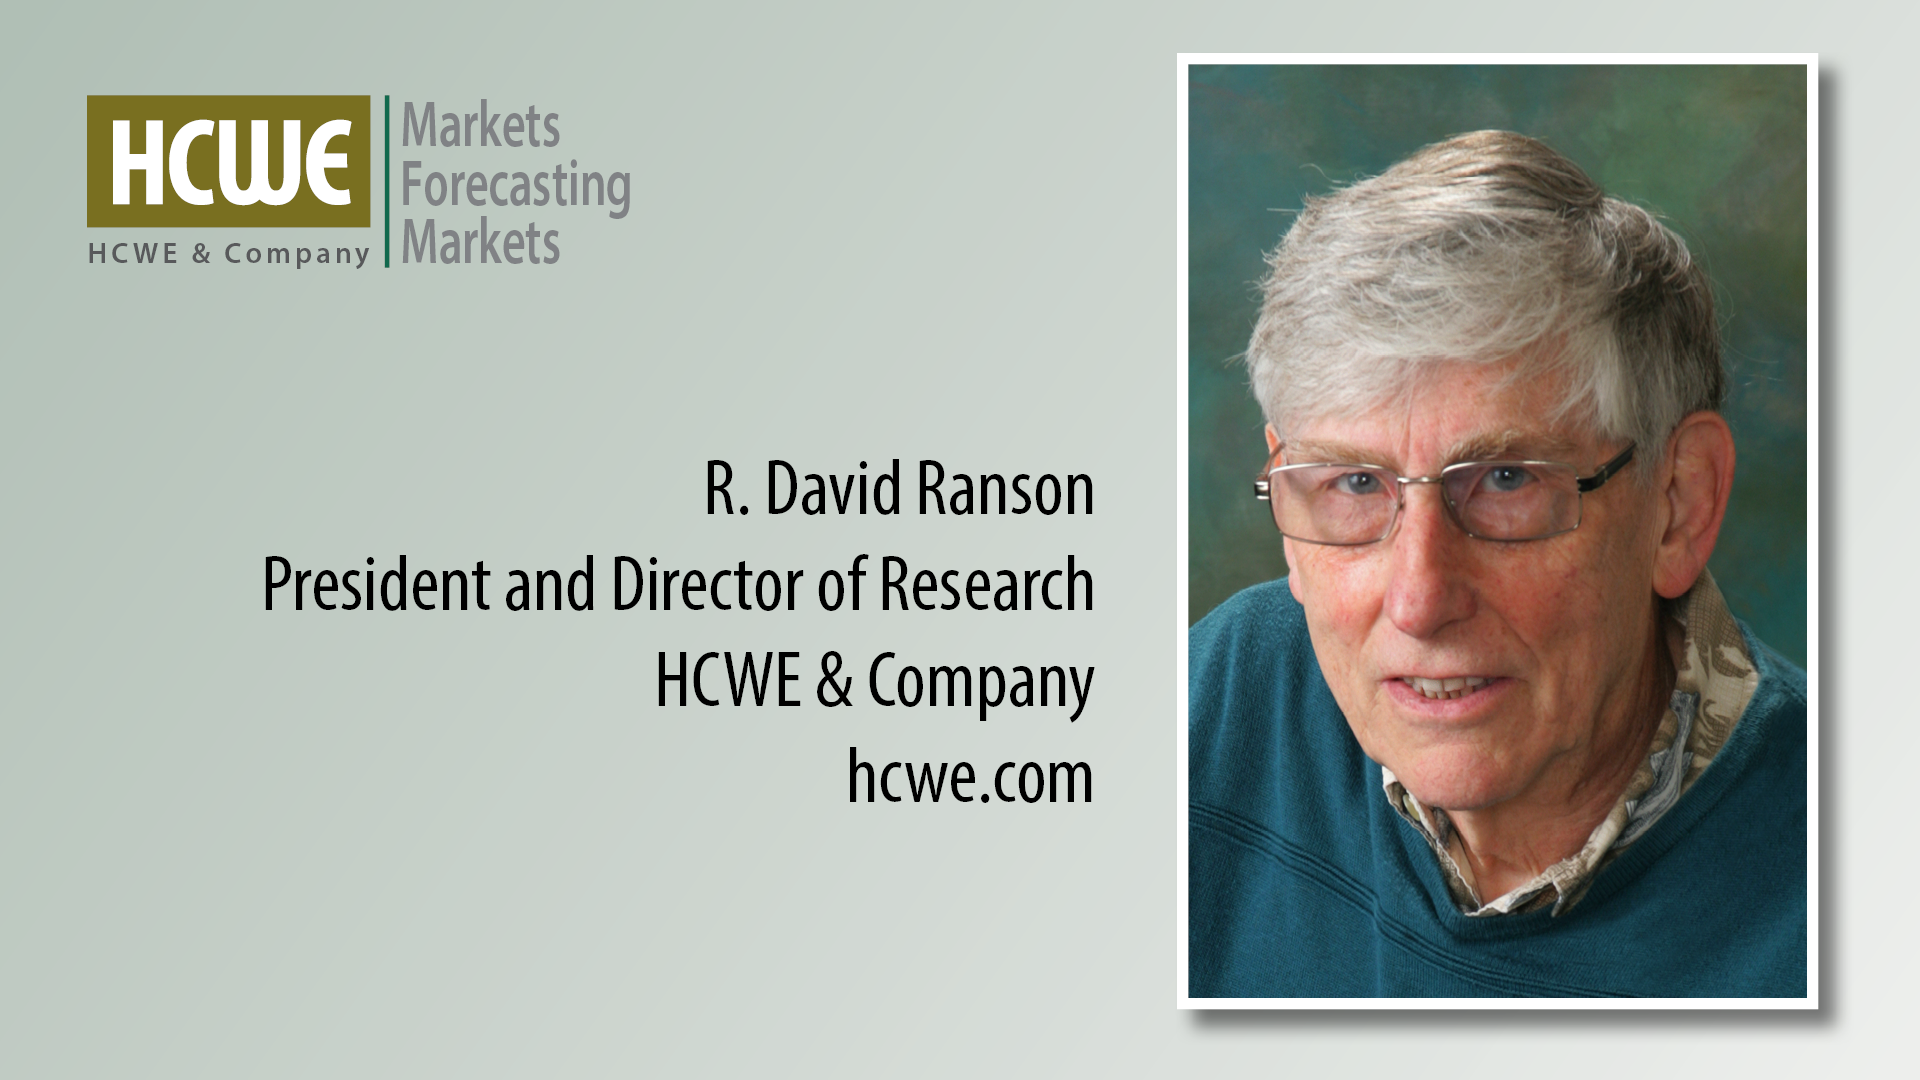 David Ranson - President and Director of Research at HCWE & Co